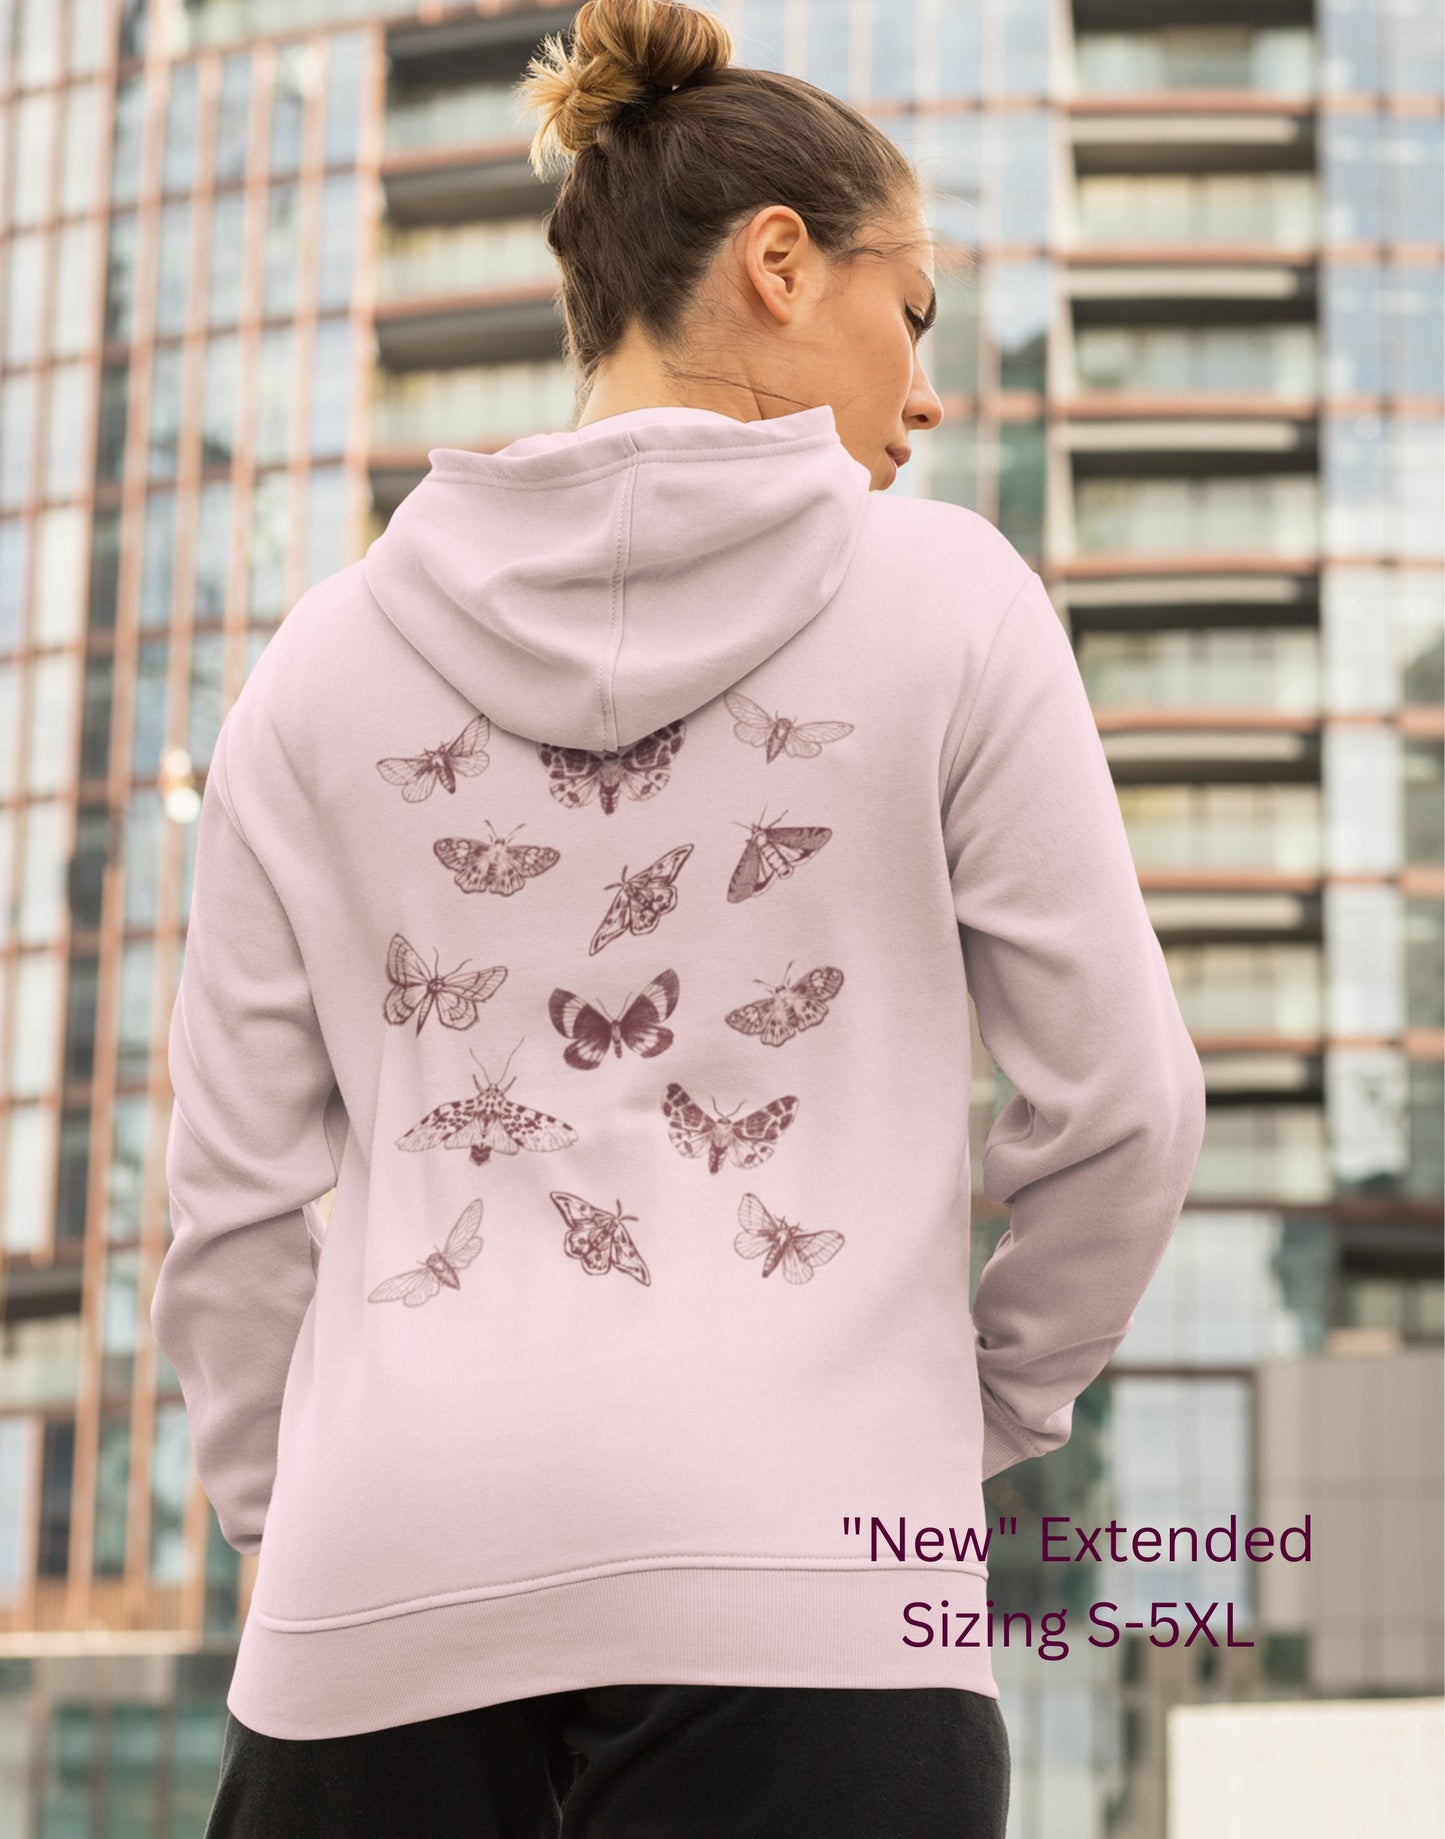 Cottage Core Pullover Hoodie, Moth Aesthetic Hoodie, Boho Cottagecore Pastel Pullover, Aesthetic Sweatshirt, Trendy Sweatshirts for Women